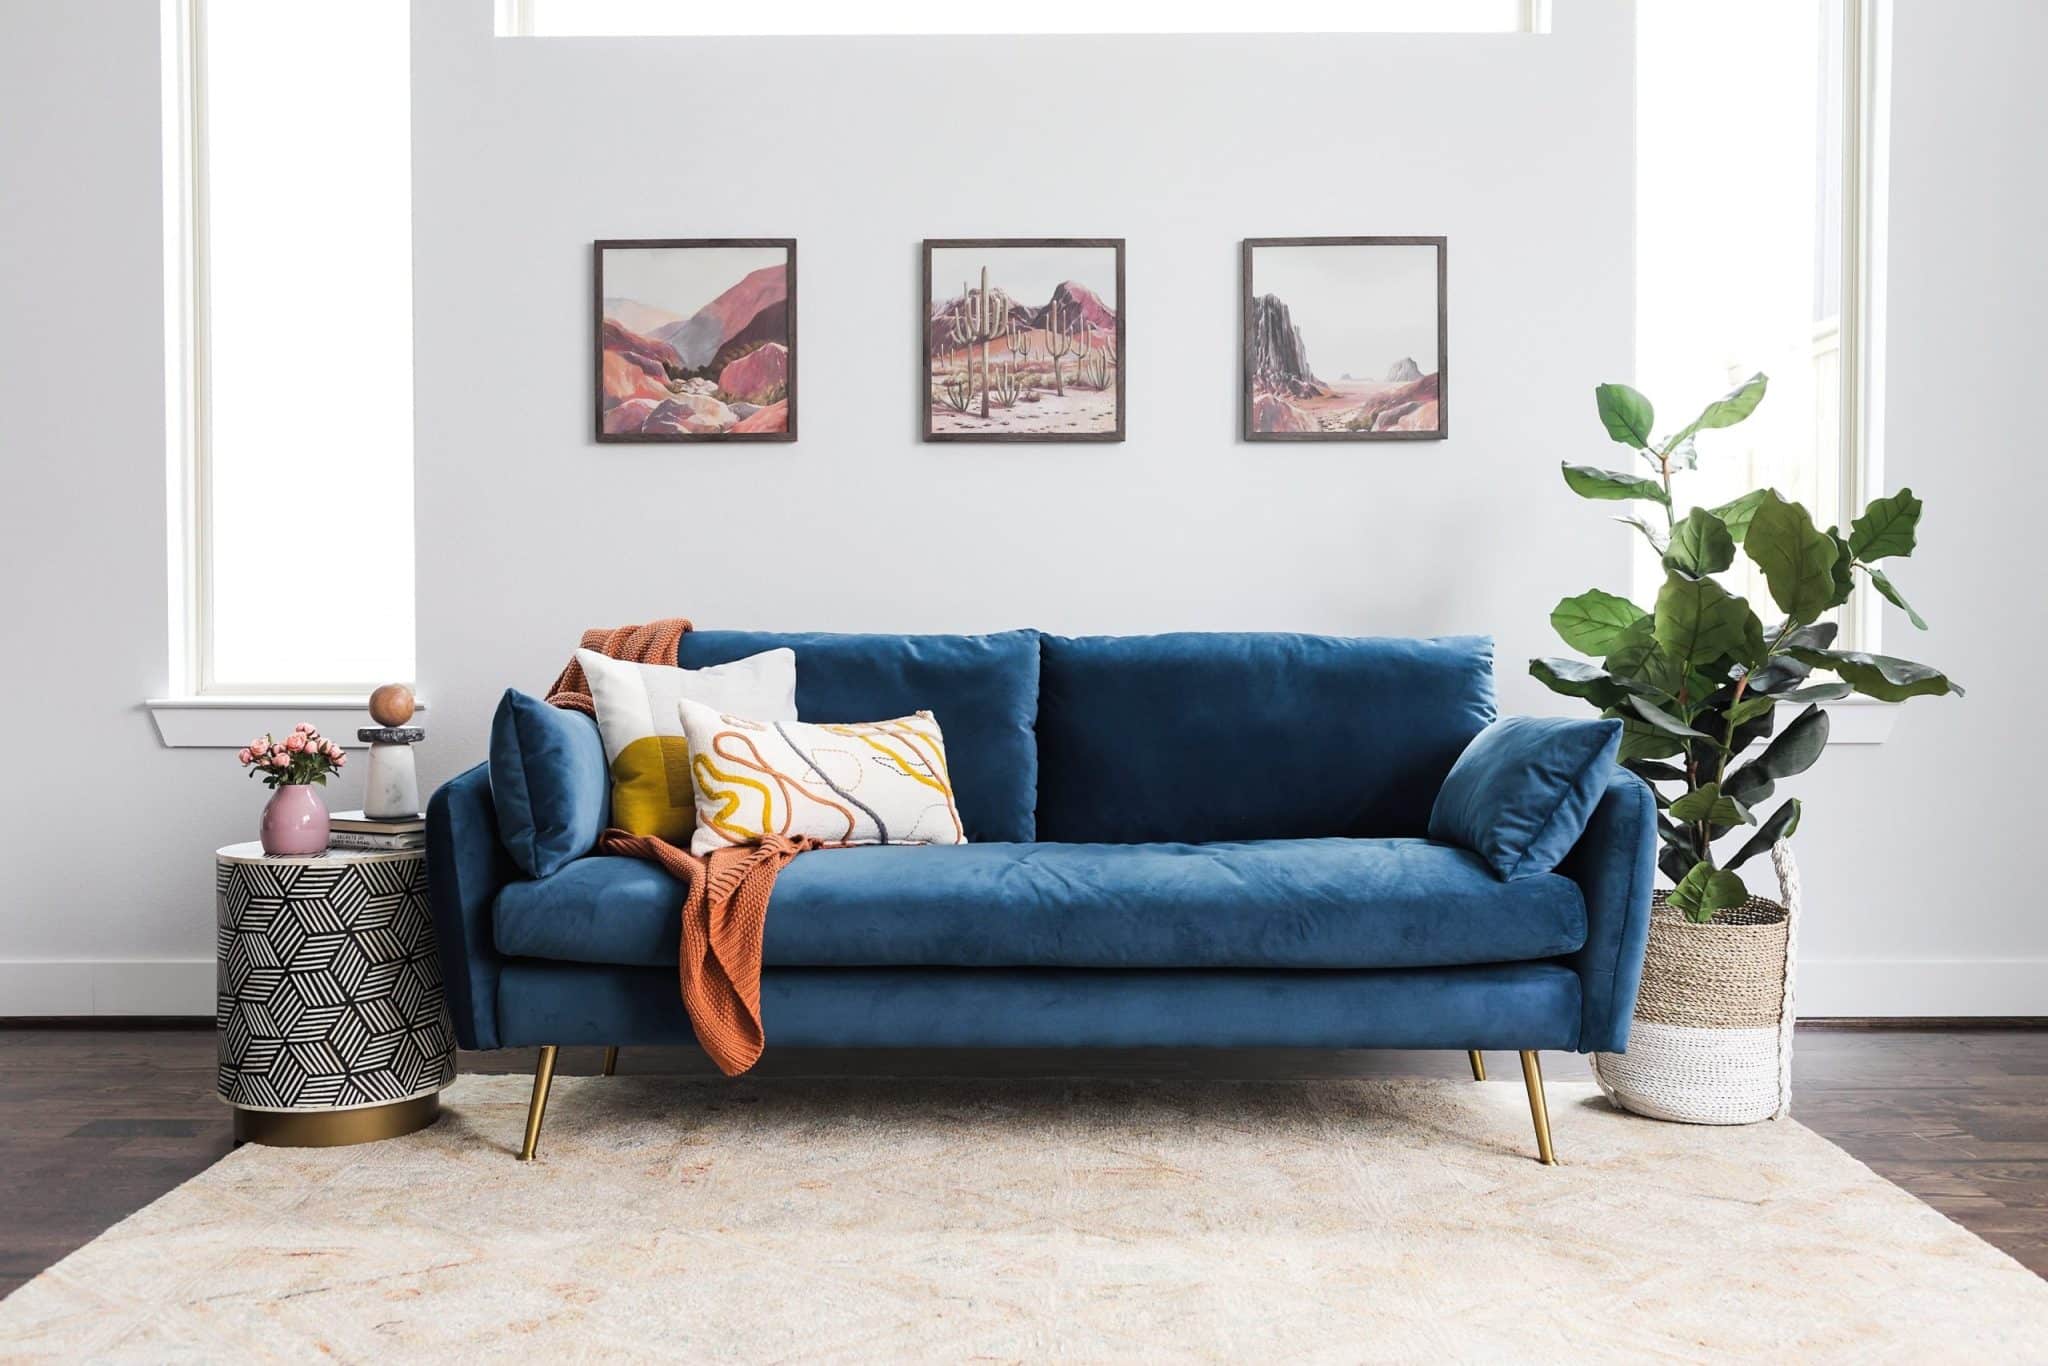 Can a Blue Velvet Sofa Be Paired with Other Velvet Furniture or Decor in The Room?